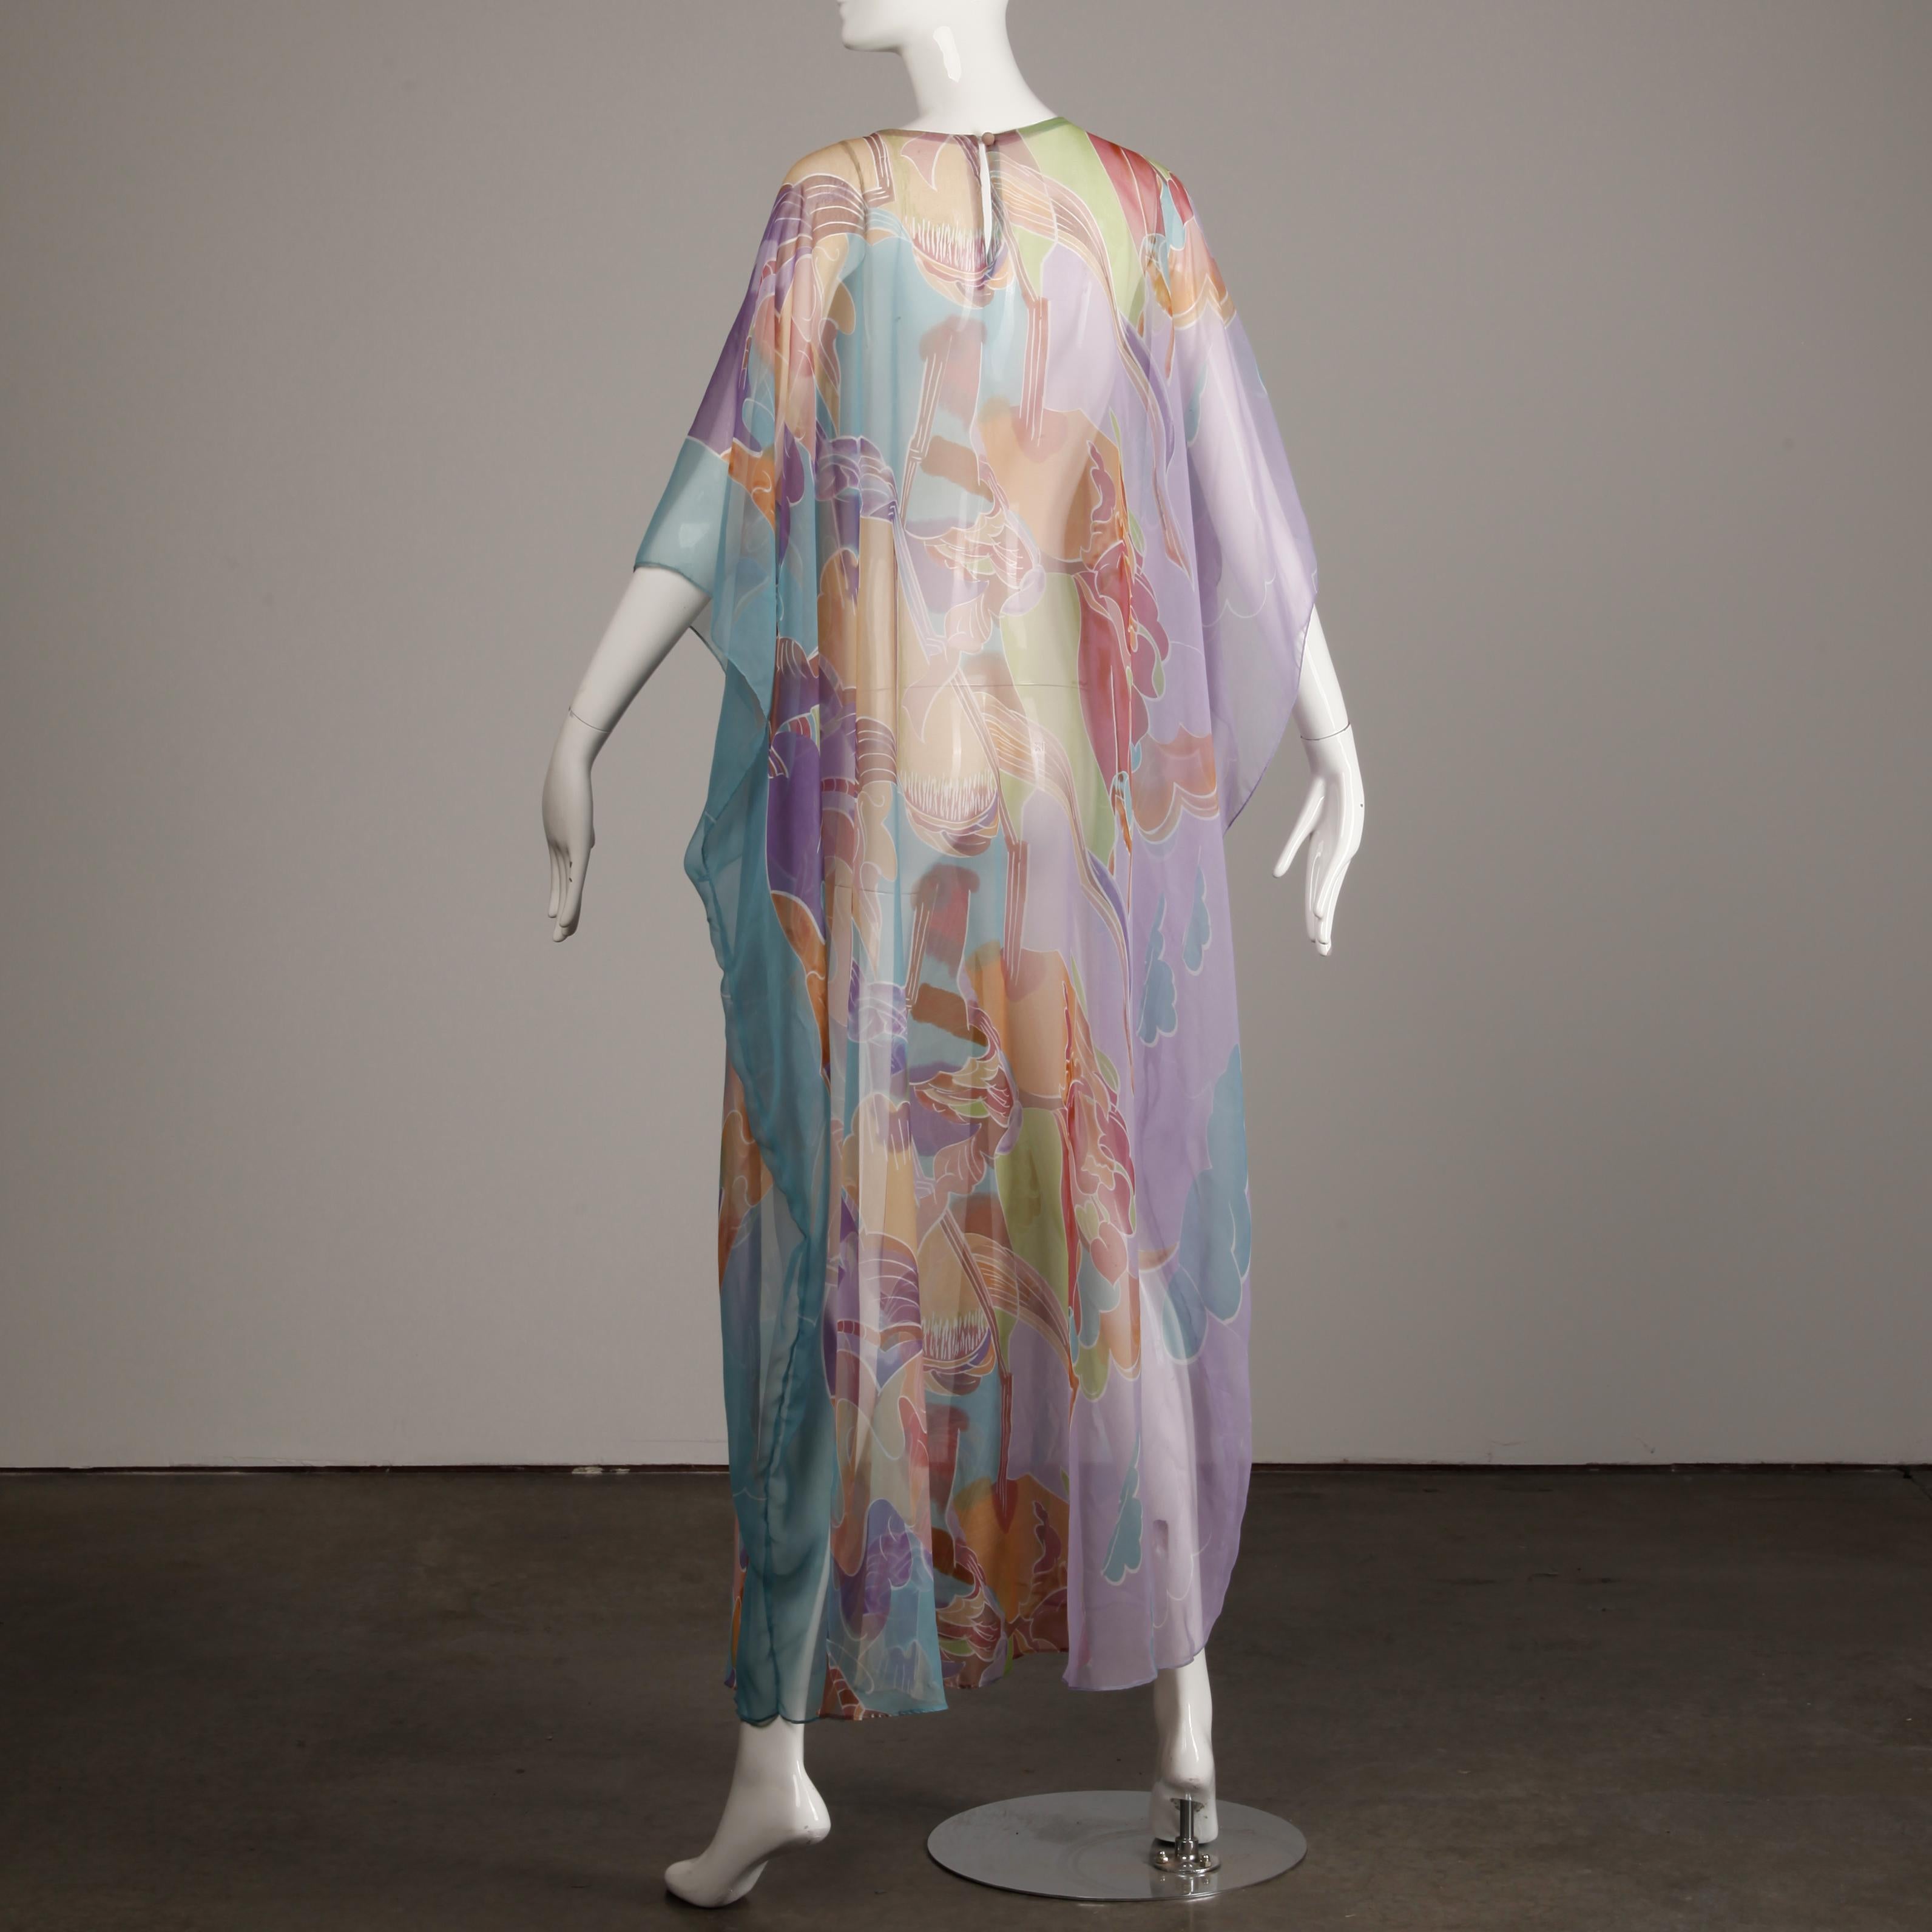 Women's 1970s Vintage Caftan Dress with a Sheer Abstract Cloud Print